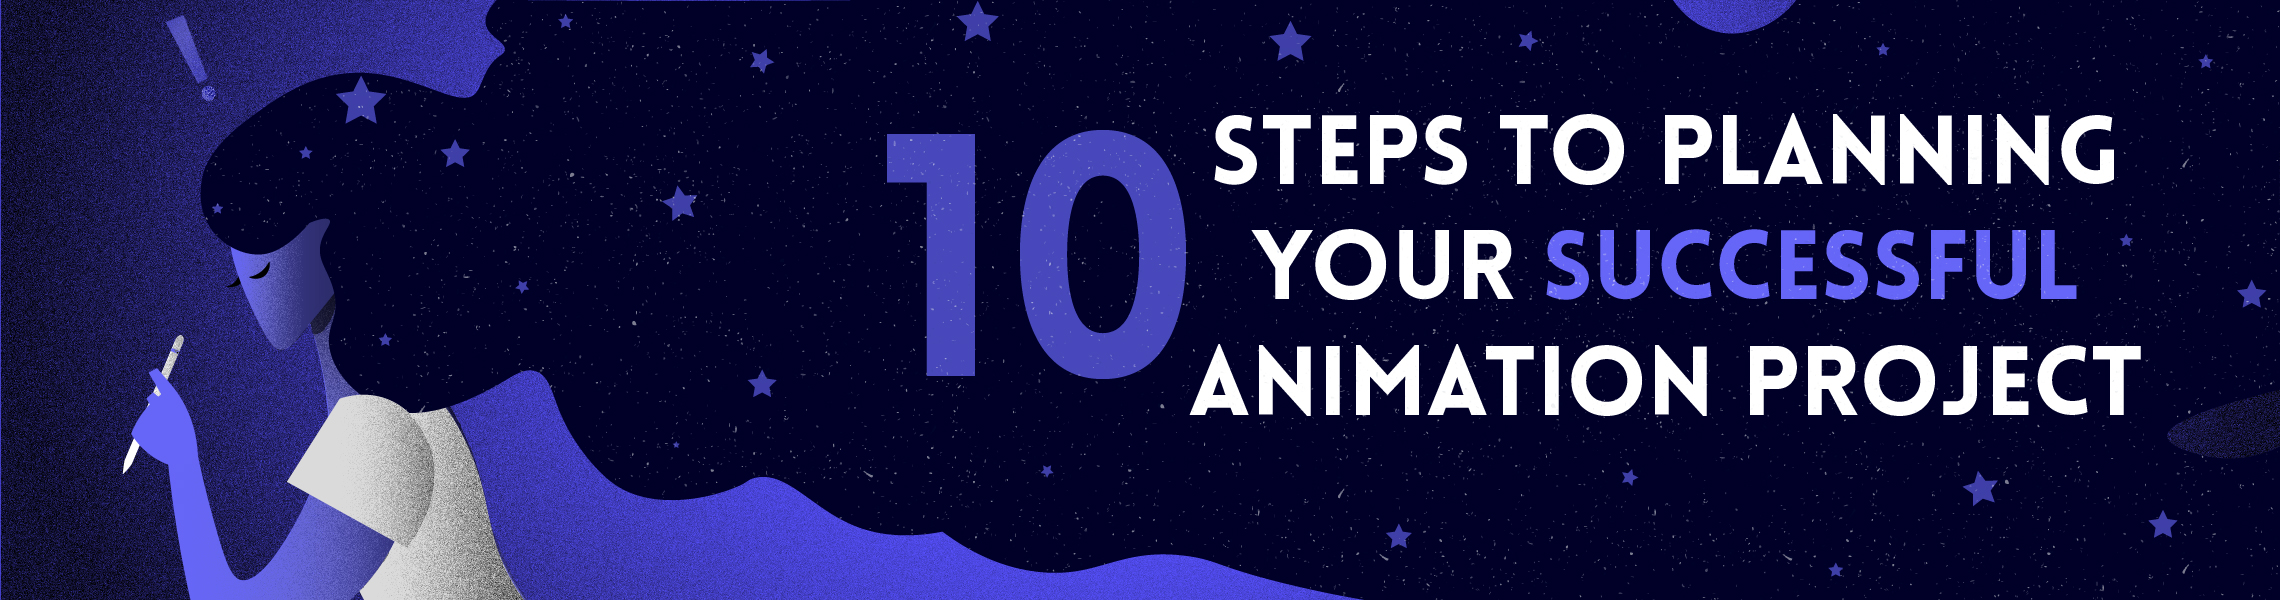 10 Steps to Planning Your Successful Animation Project